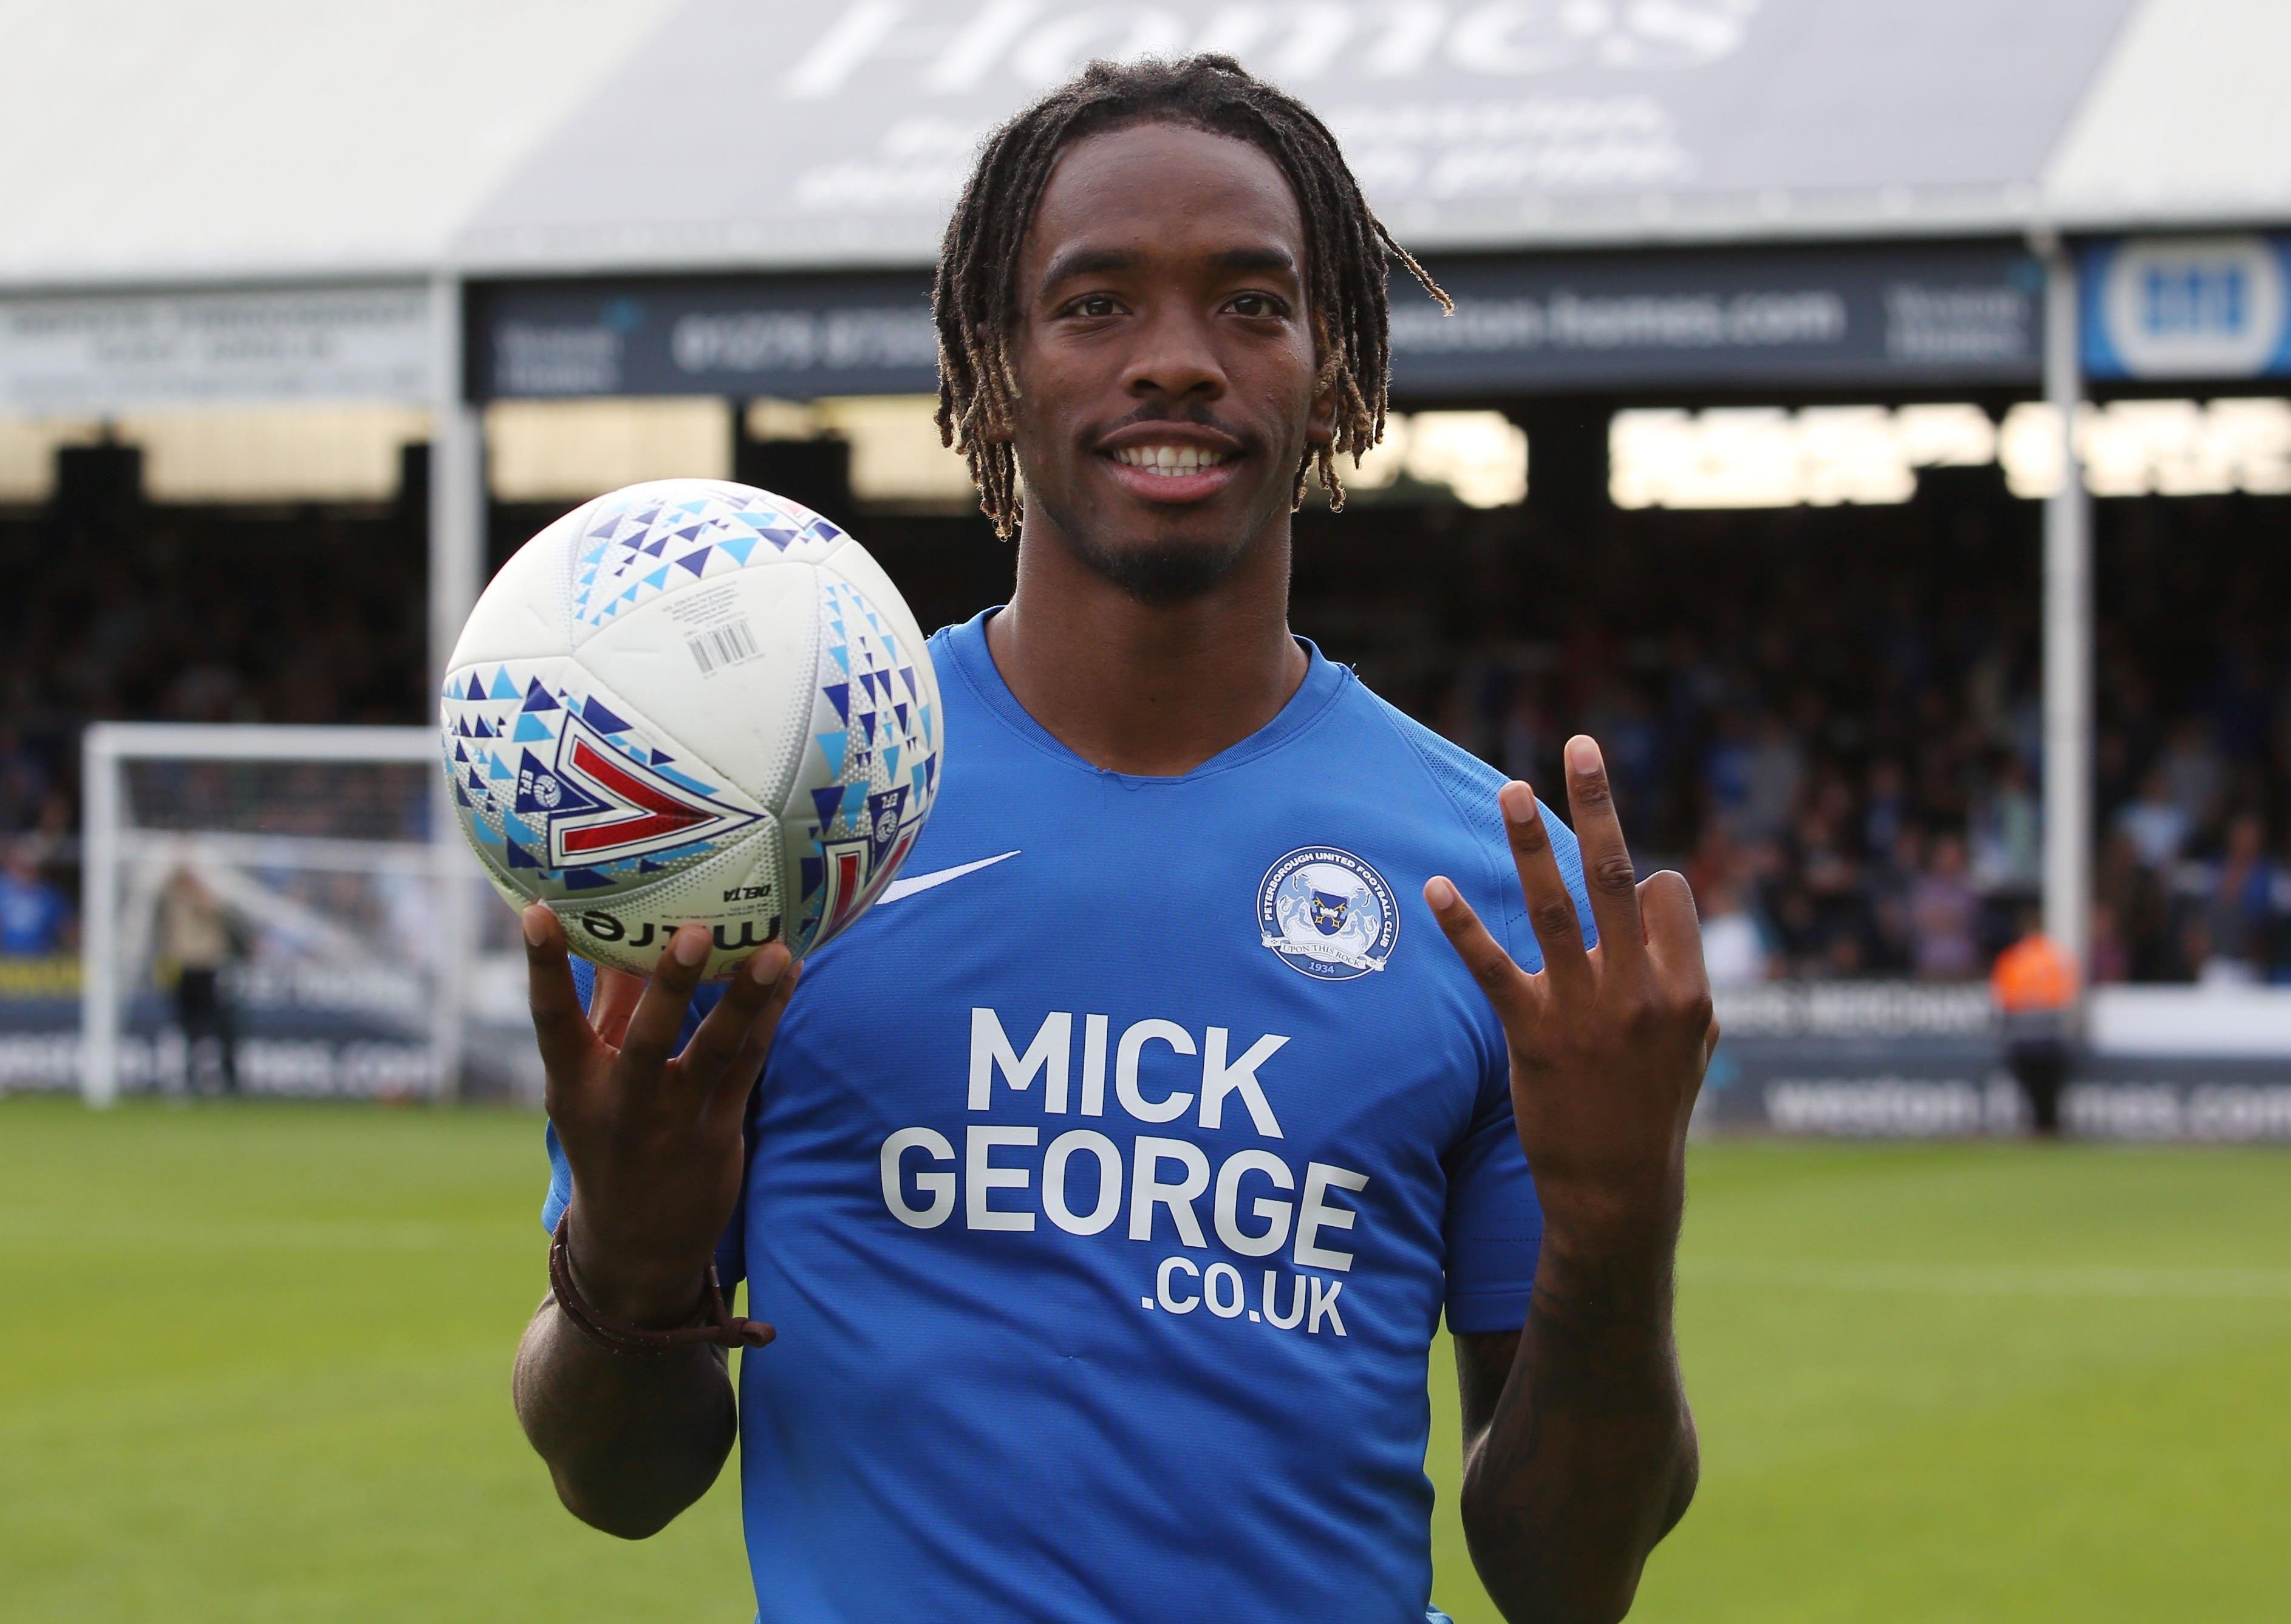 Ivan Toney’s hat-trick set up the biggest Posh win of the year, 6-0 against Rochdale in a League One fixture at the Weston Homes Stadium. Posh also beat Accrington Stanley and MK Dons 4-0.